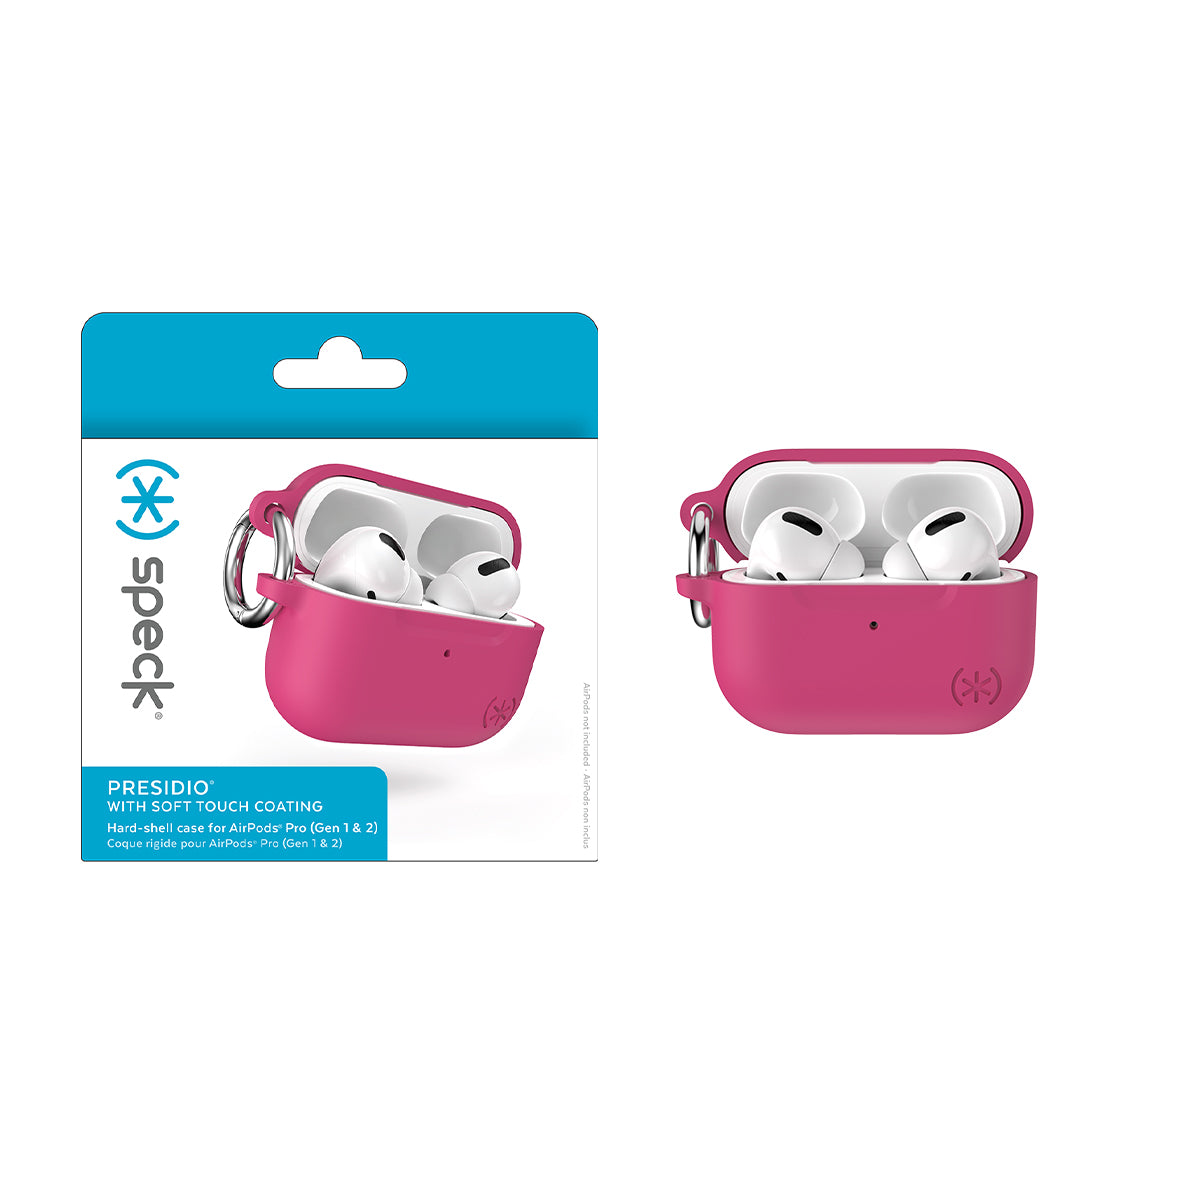 AIRPODS PRO 1 & 2 SPECK PRESIDIO with Soft Touch Coating Case